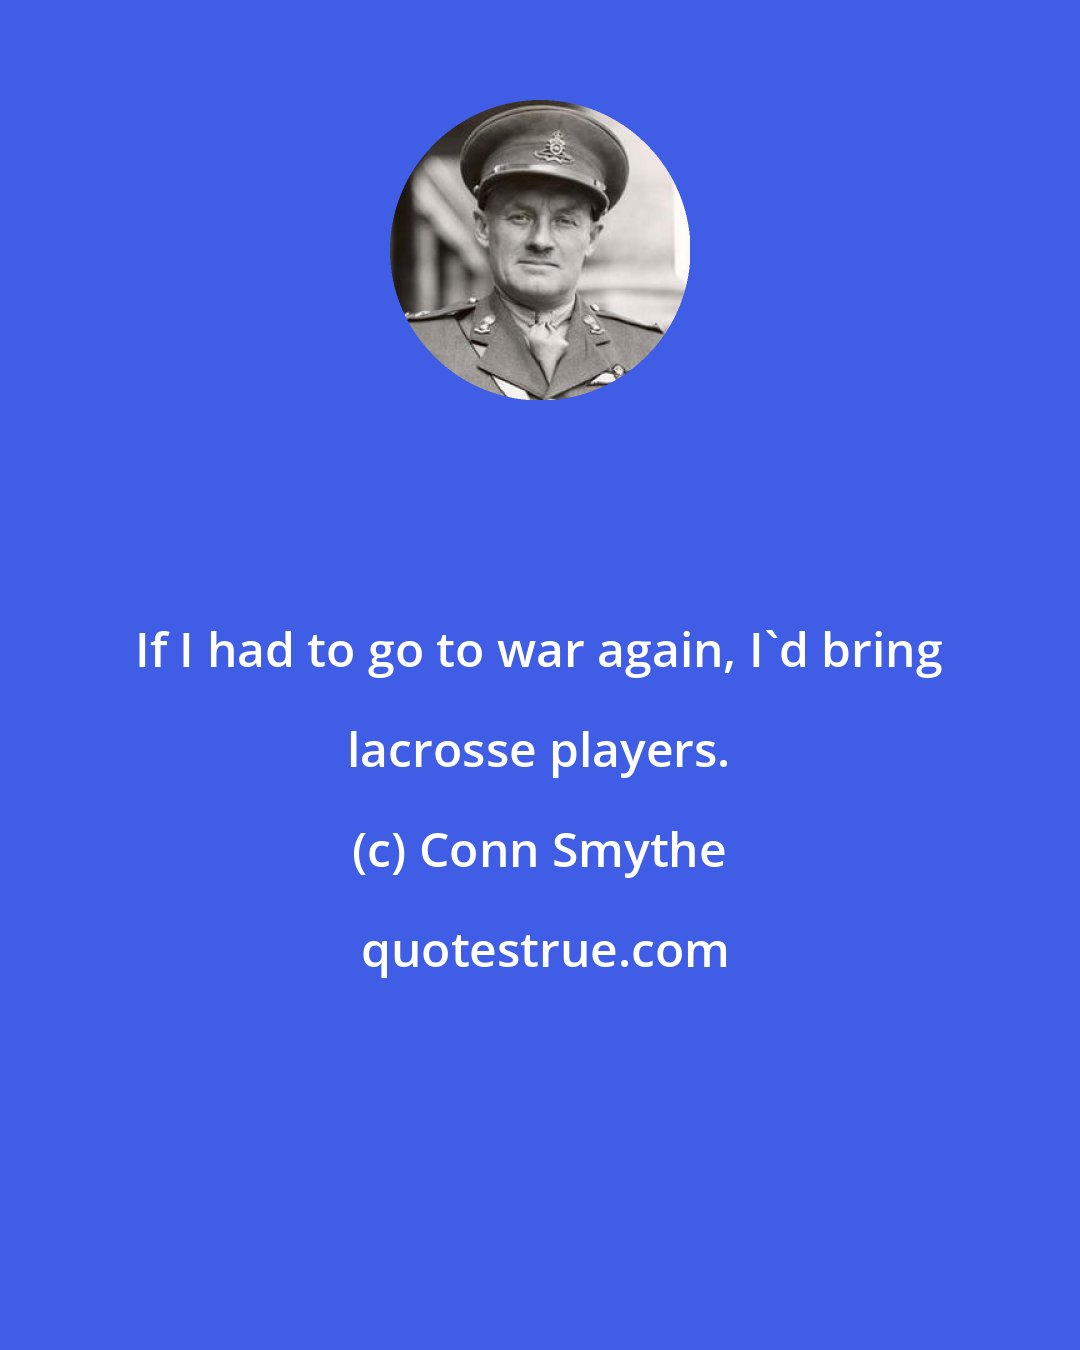 Conn Smythe: If I had to go to war again, I'd bring lacrosse players.